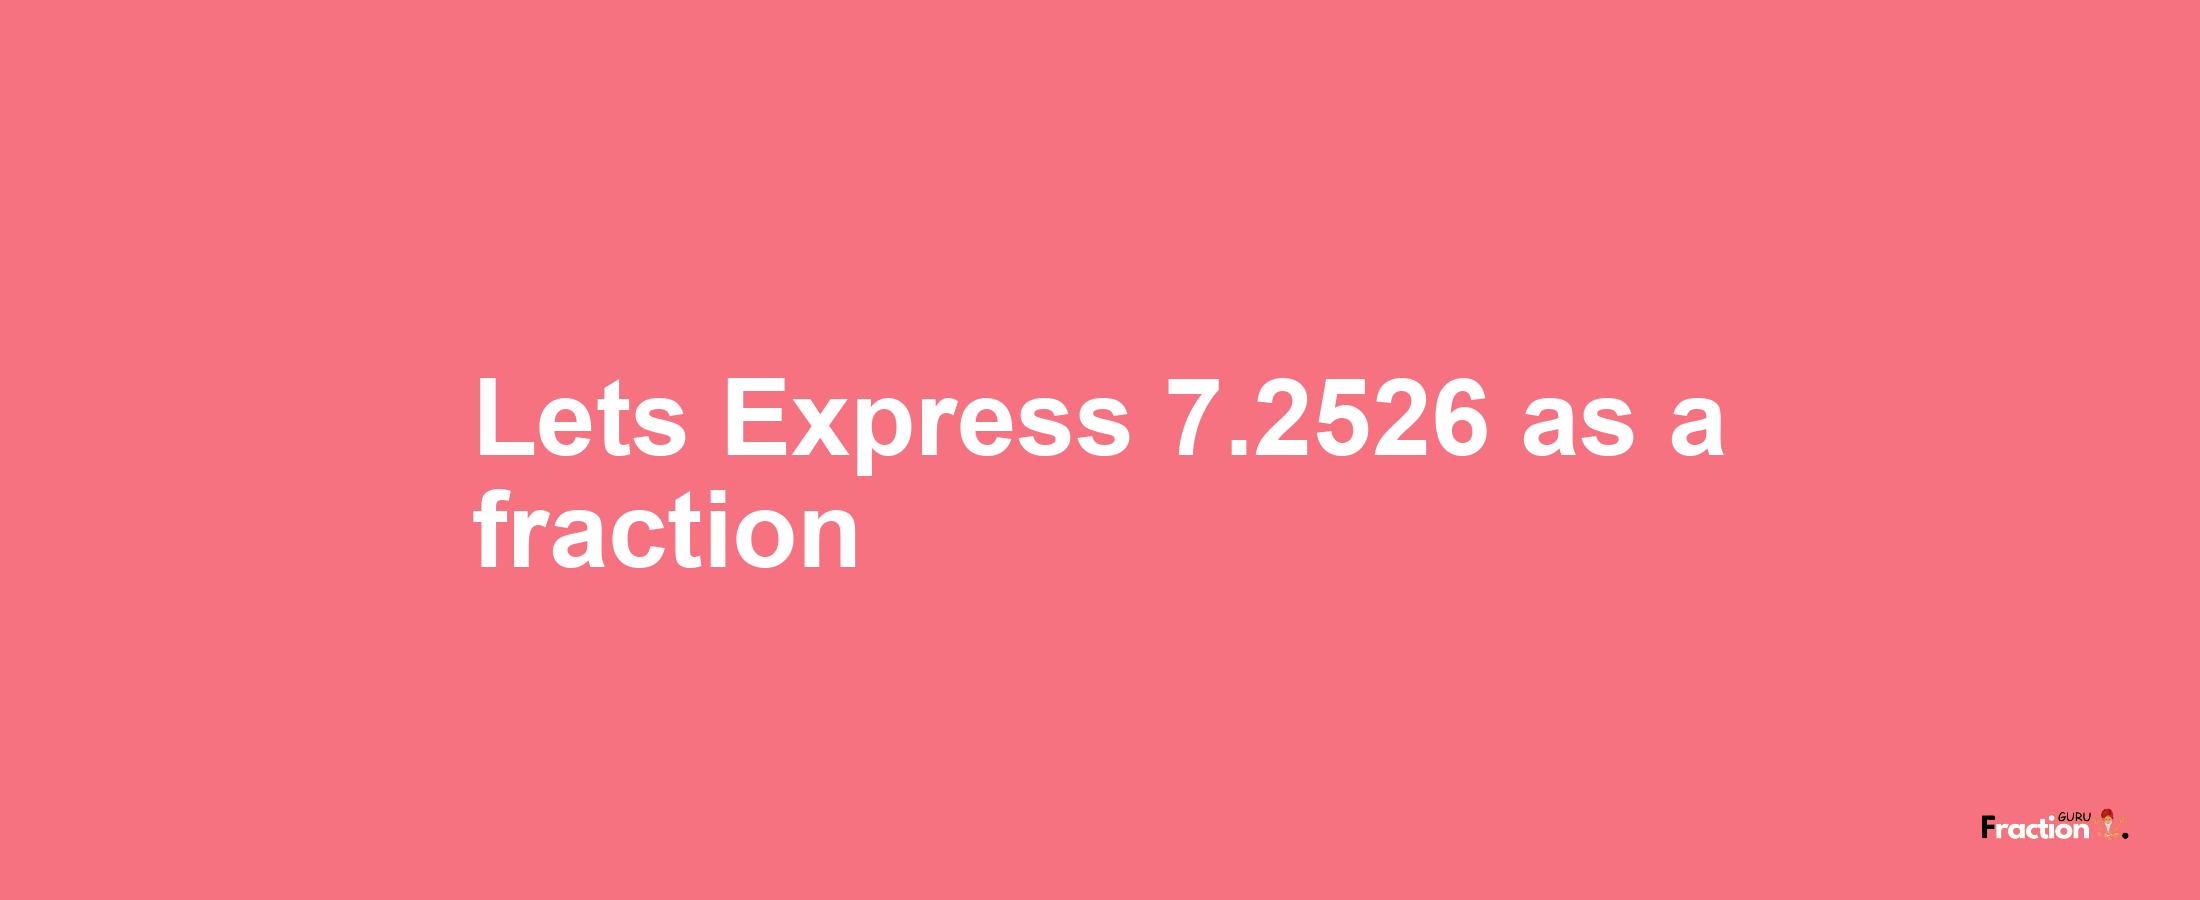 Lets Express 7.2526 as afraction